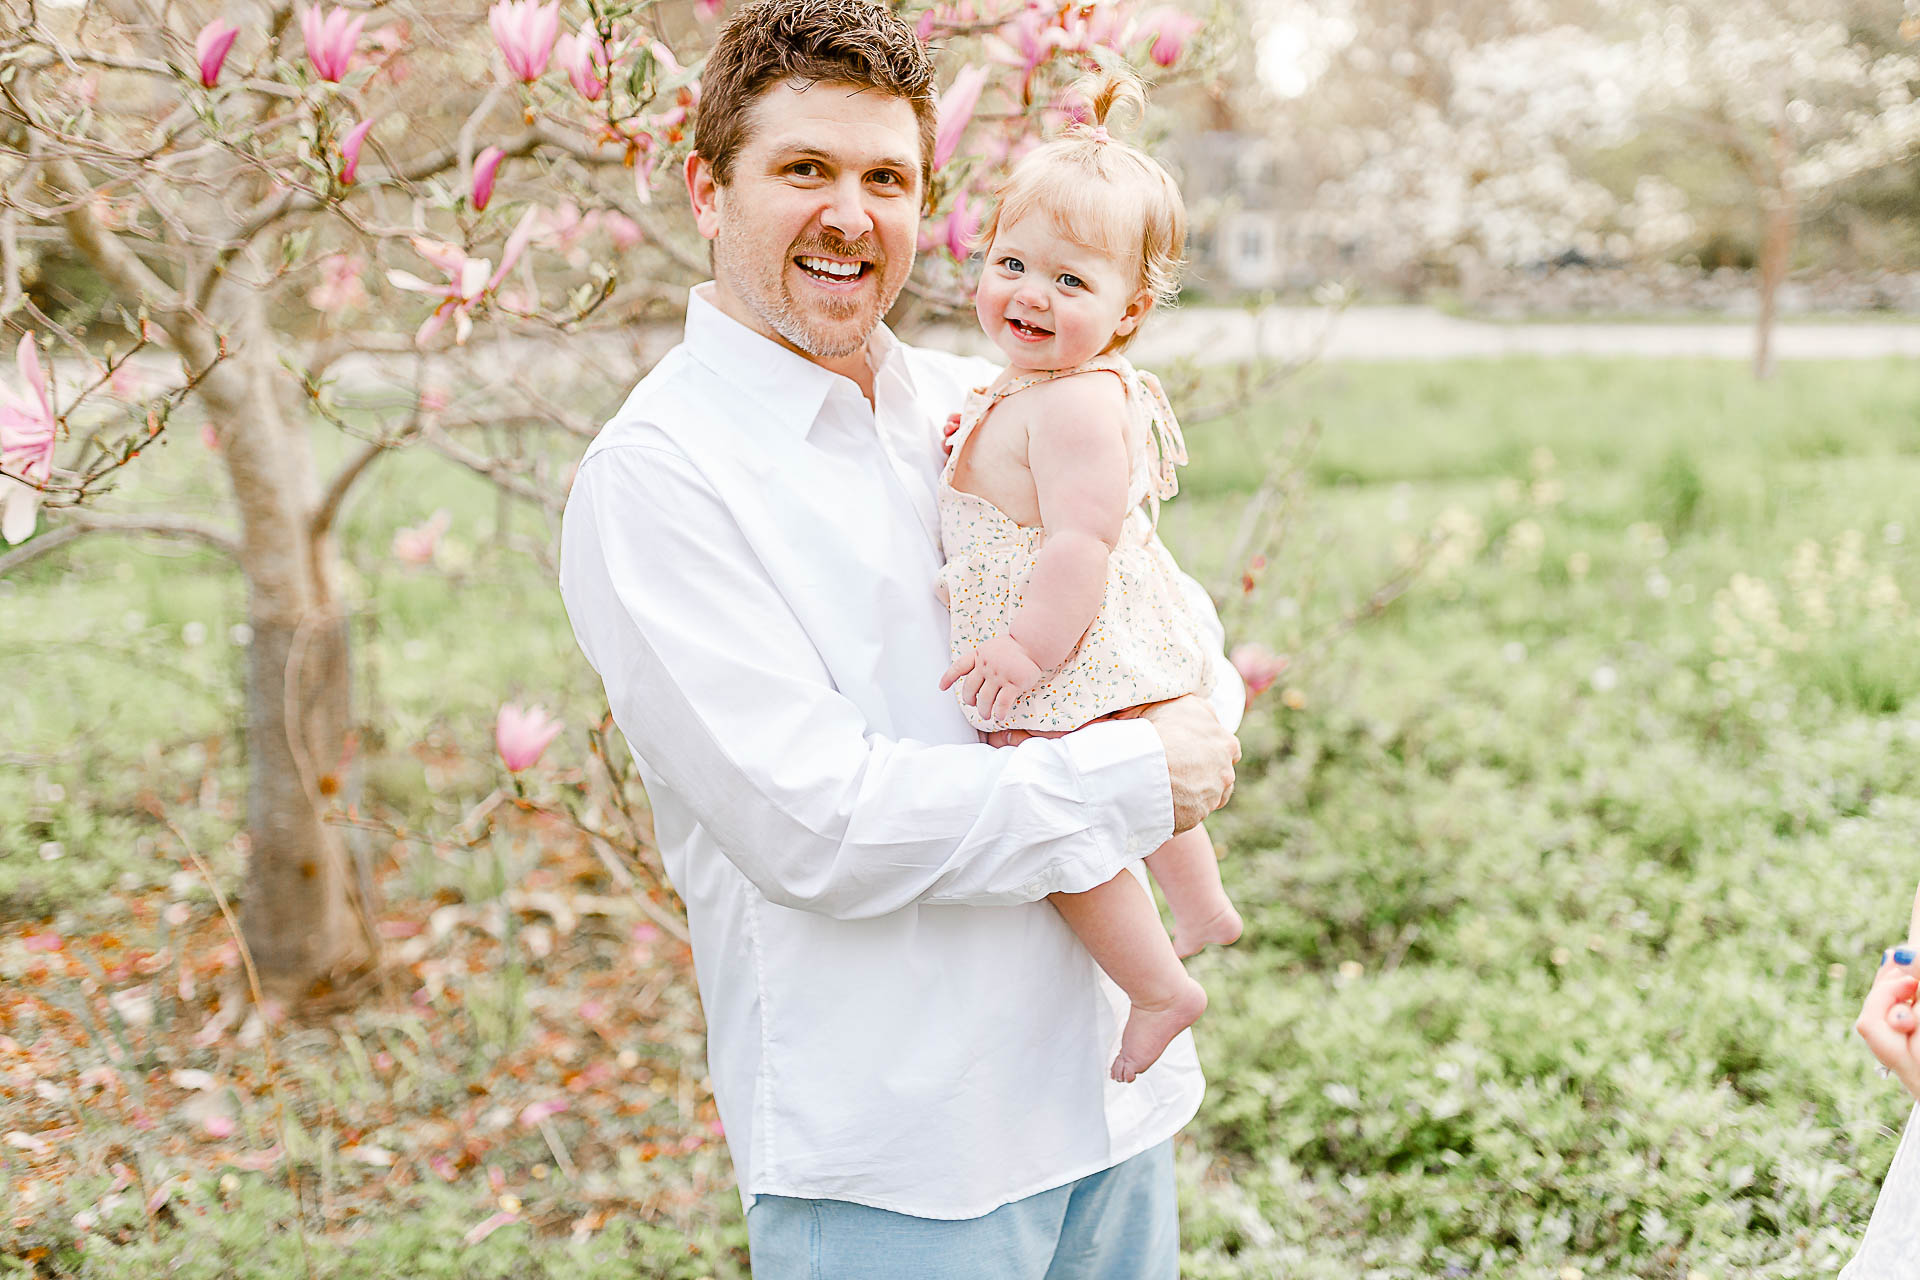 Photo by Kingston Massachusetts Photographer Christina Runnals Photography | Father holding baby daughter